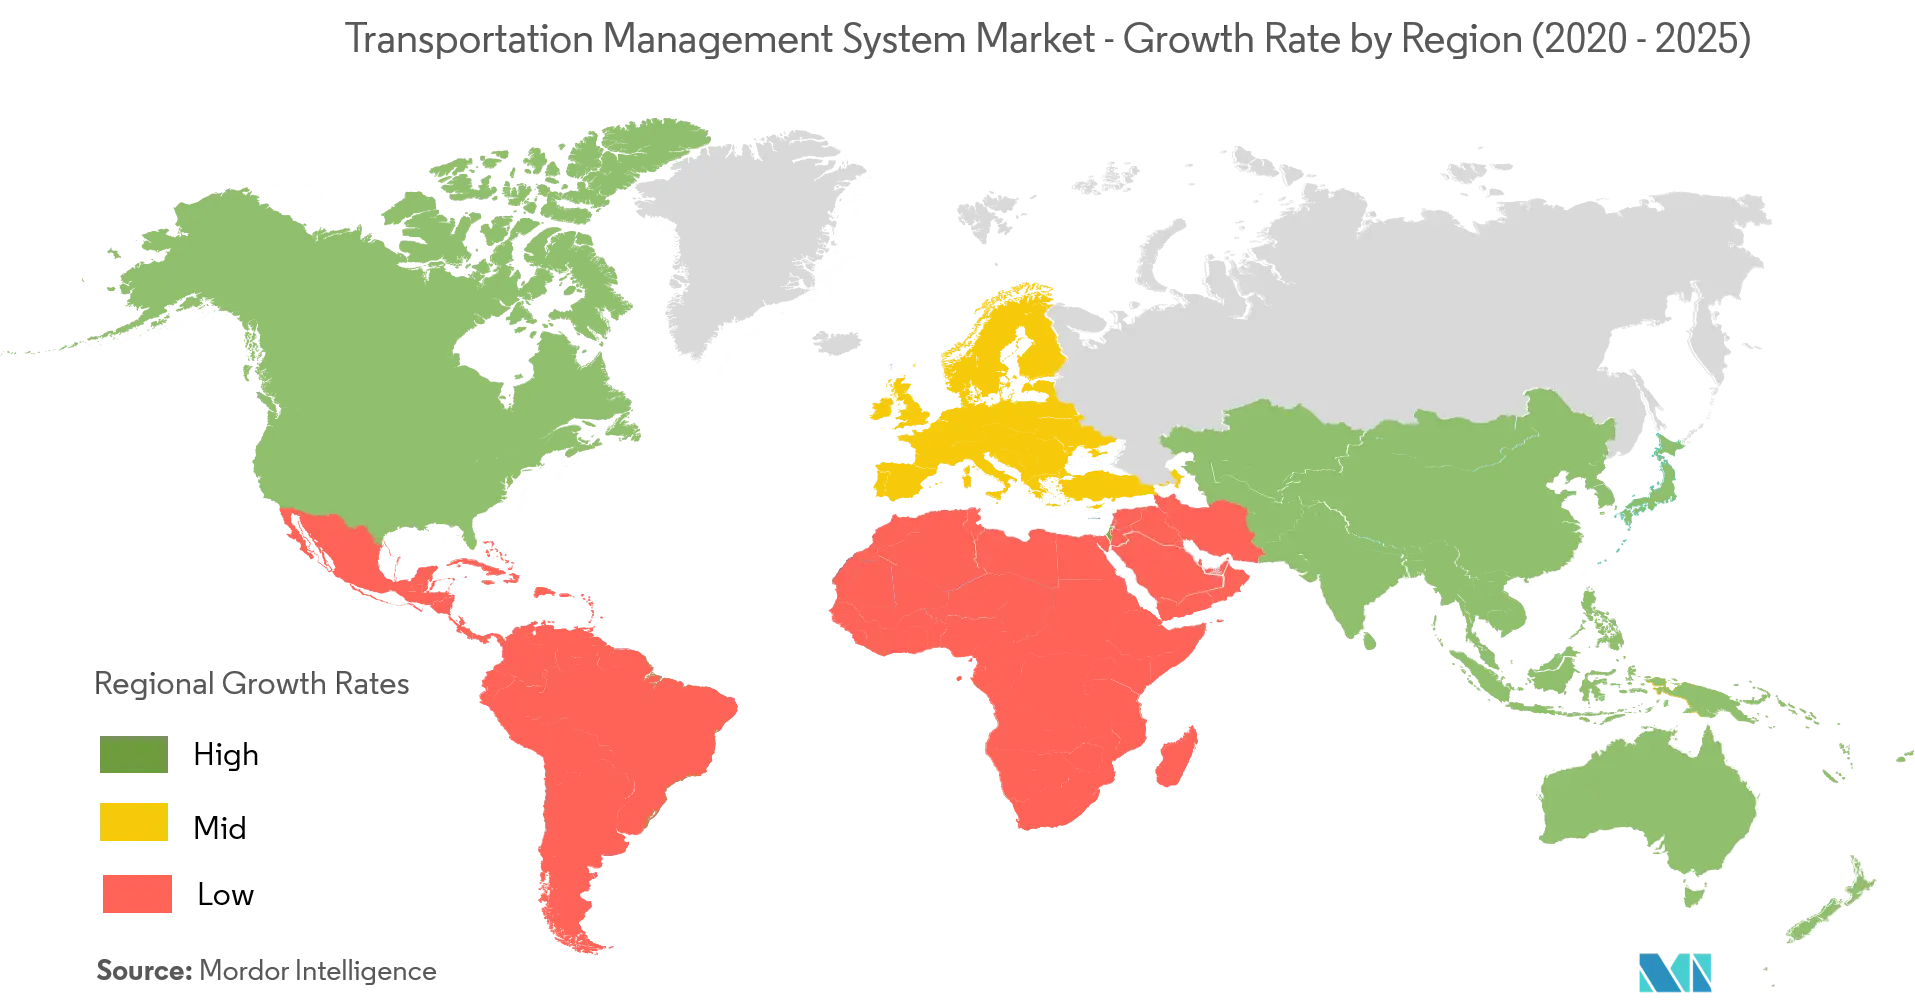 Transportation Management System Market - Growth Rate by Region